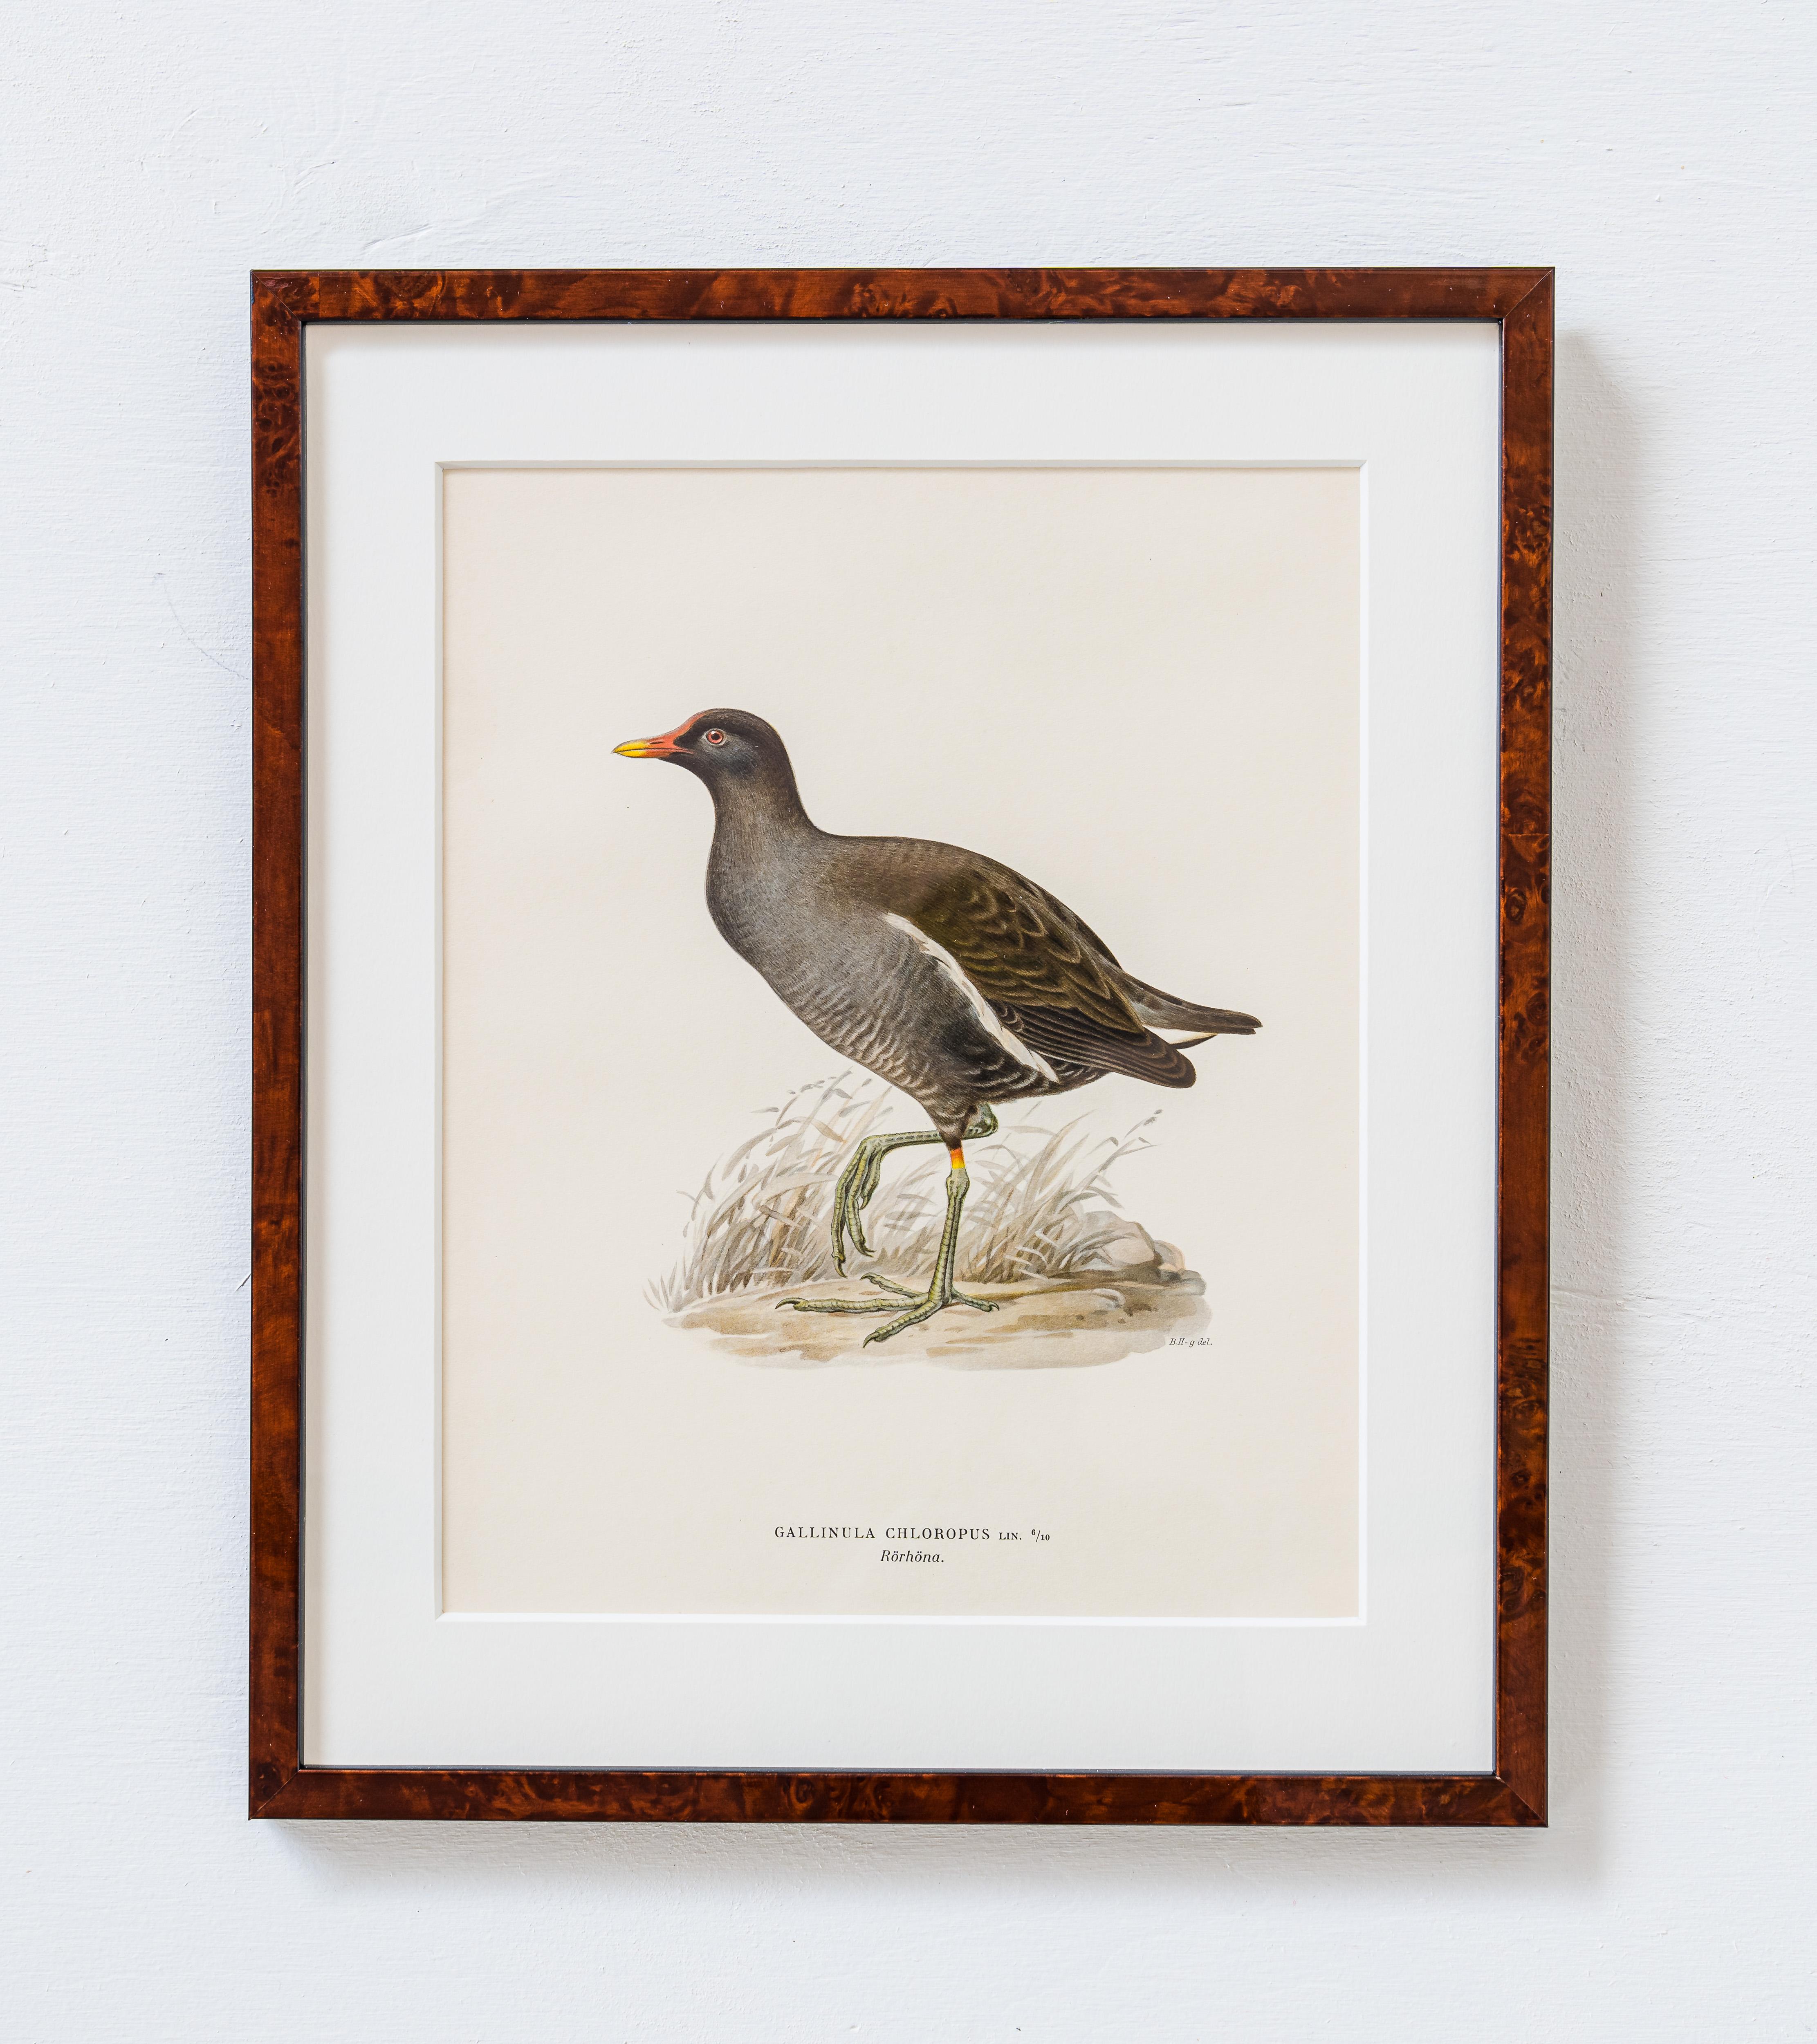 Wilhelm and Ferdinand von Wright belonged to a Swedish-Finnish noble family in the 17th century. Together with their brother Magnus von Wright these ornithologists, scientists, nature illustrators and artists became known for their studies of nature